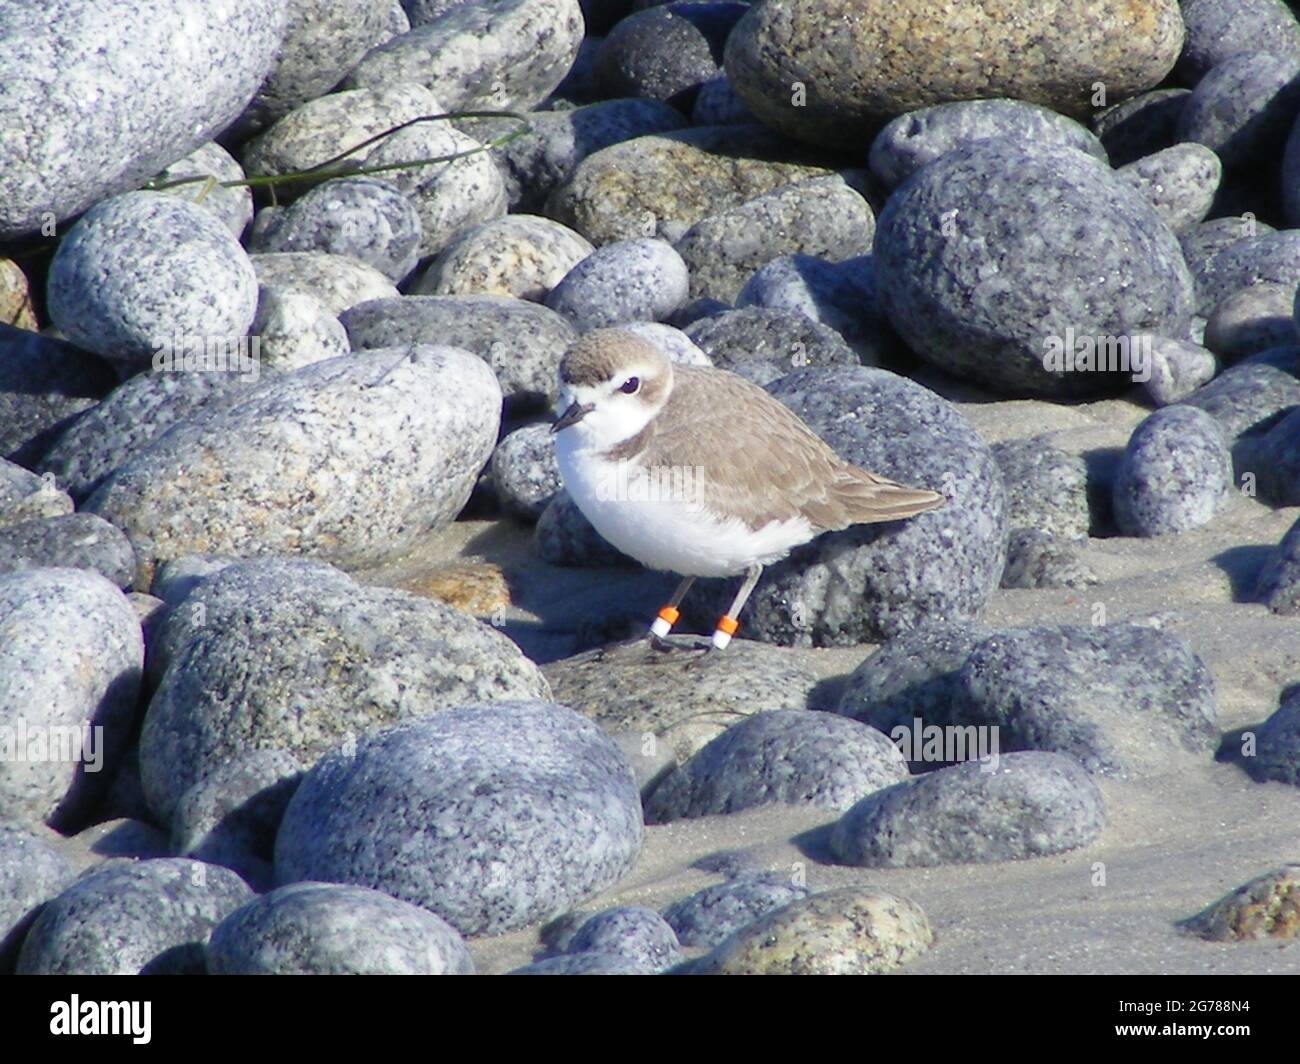 banded snowy plover (Charadrius nivosus) amongst pebbles at Pebble Beach, USA, seperate species from Kentish plover since 2011 Stock Photo